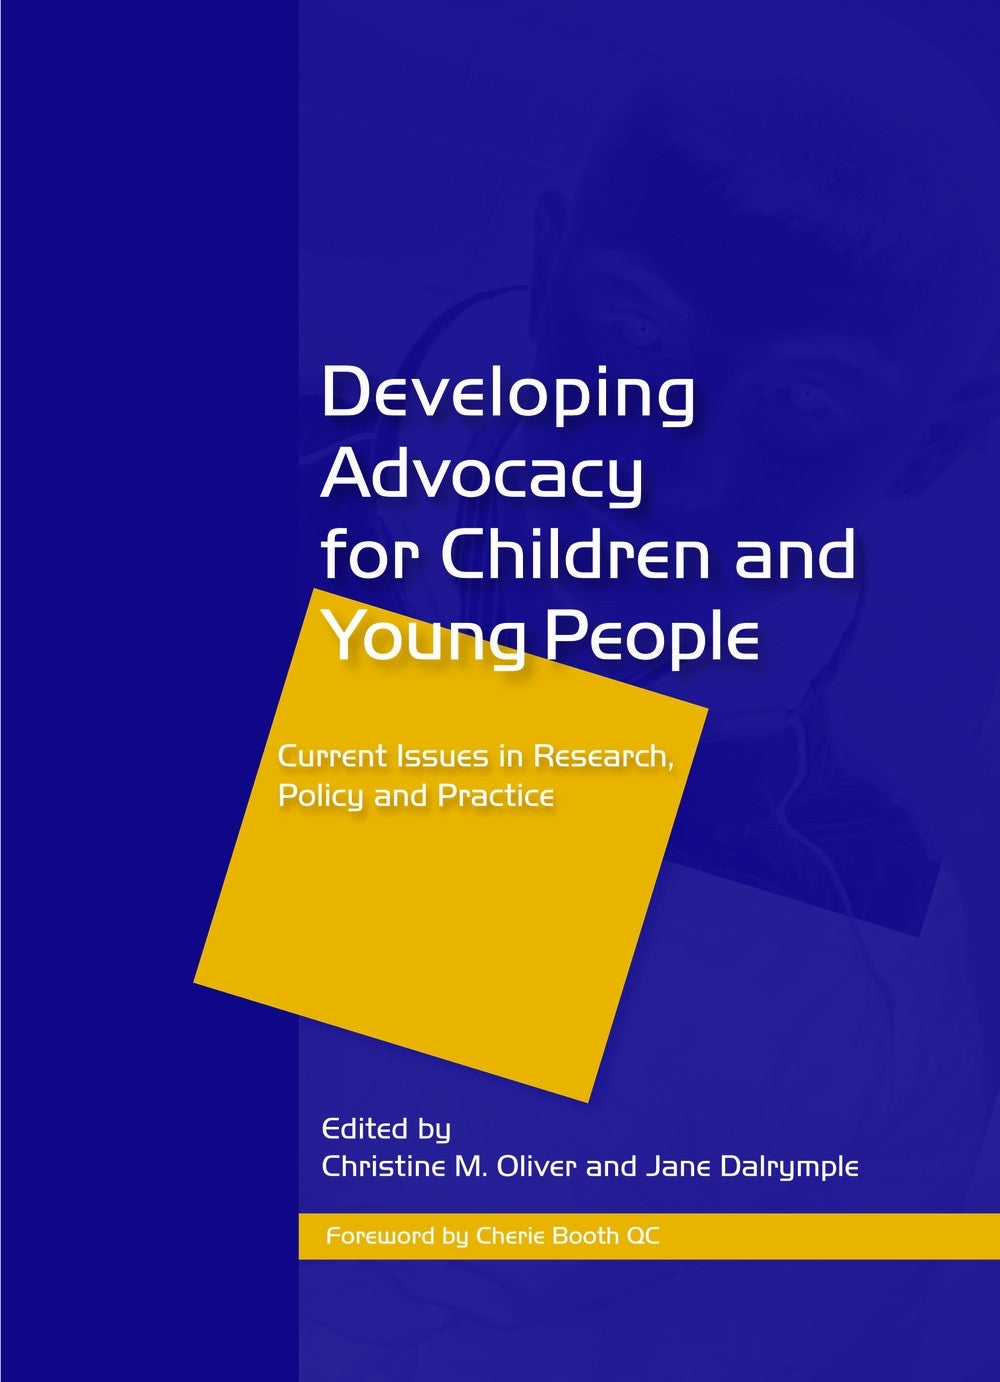 Developing Advocacy for Children and Young People by Christine Oliver, Jane Dalrymple